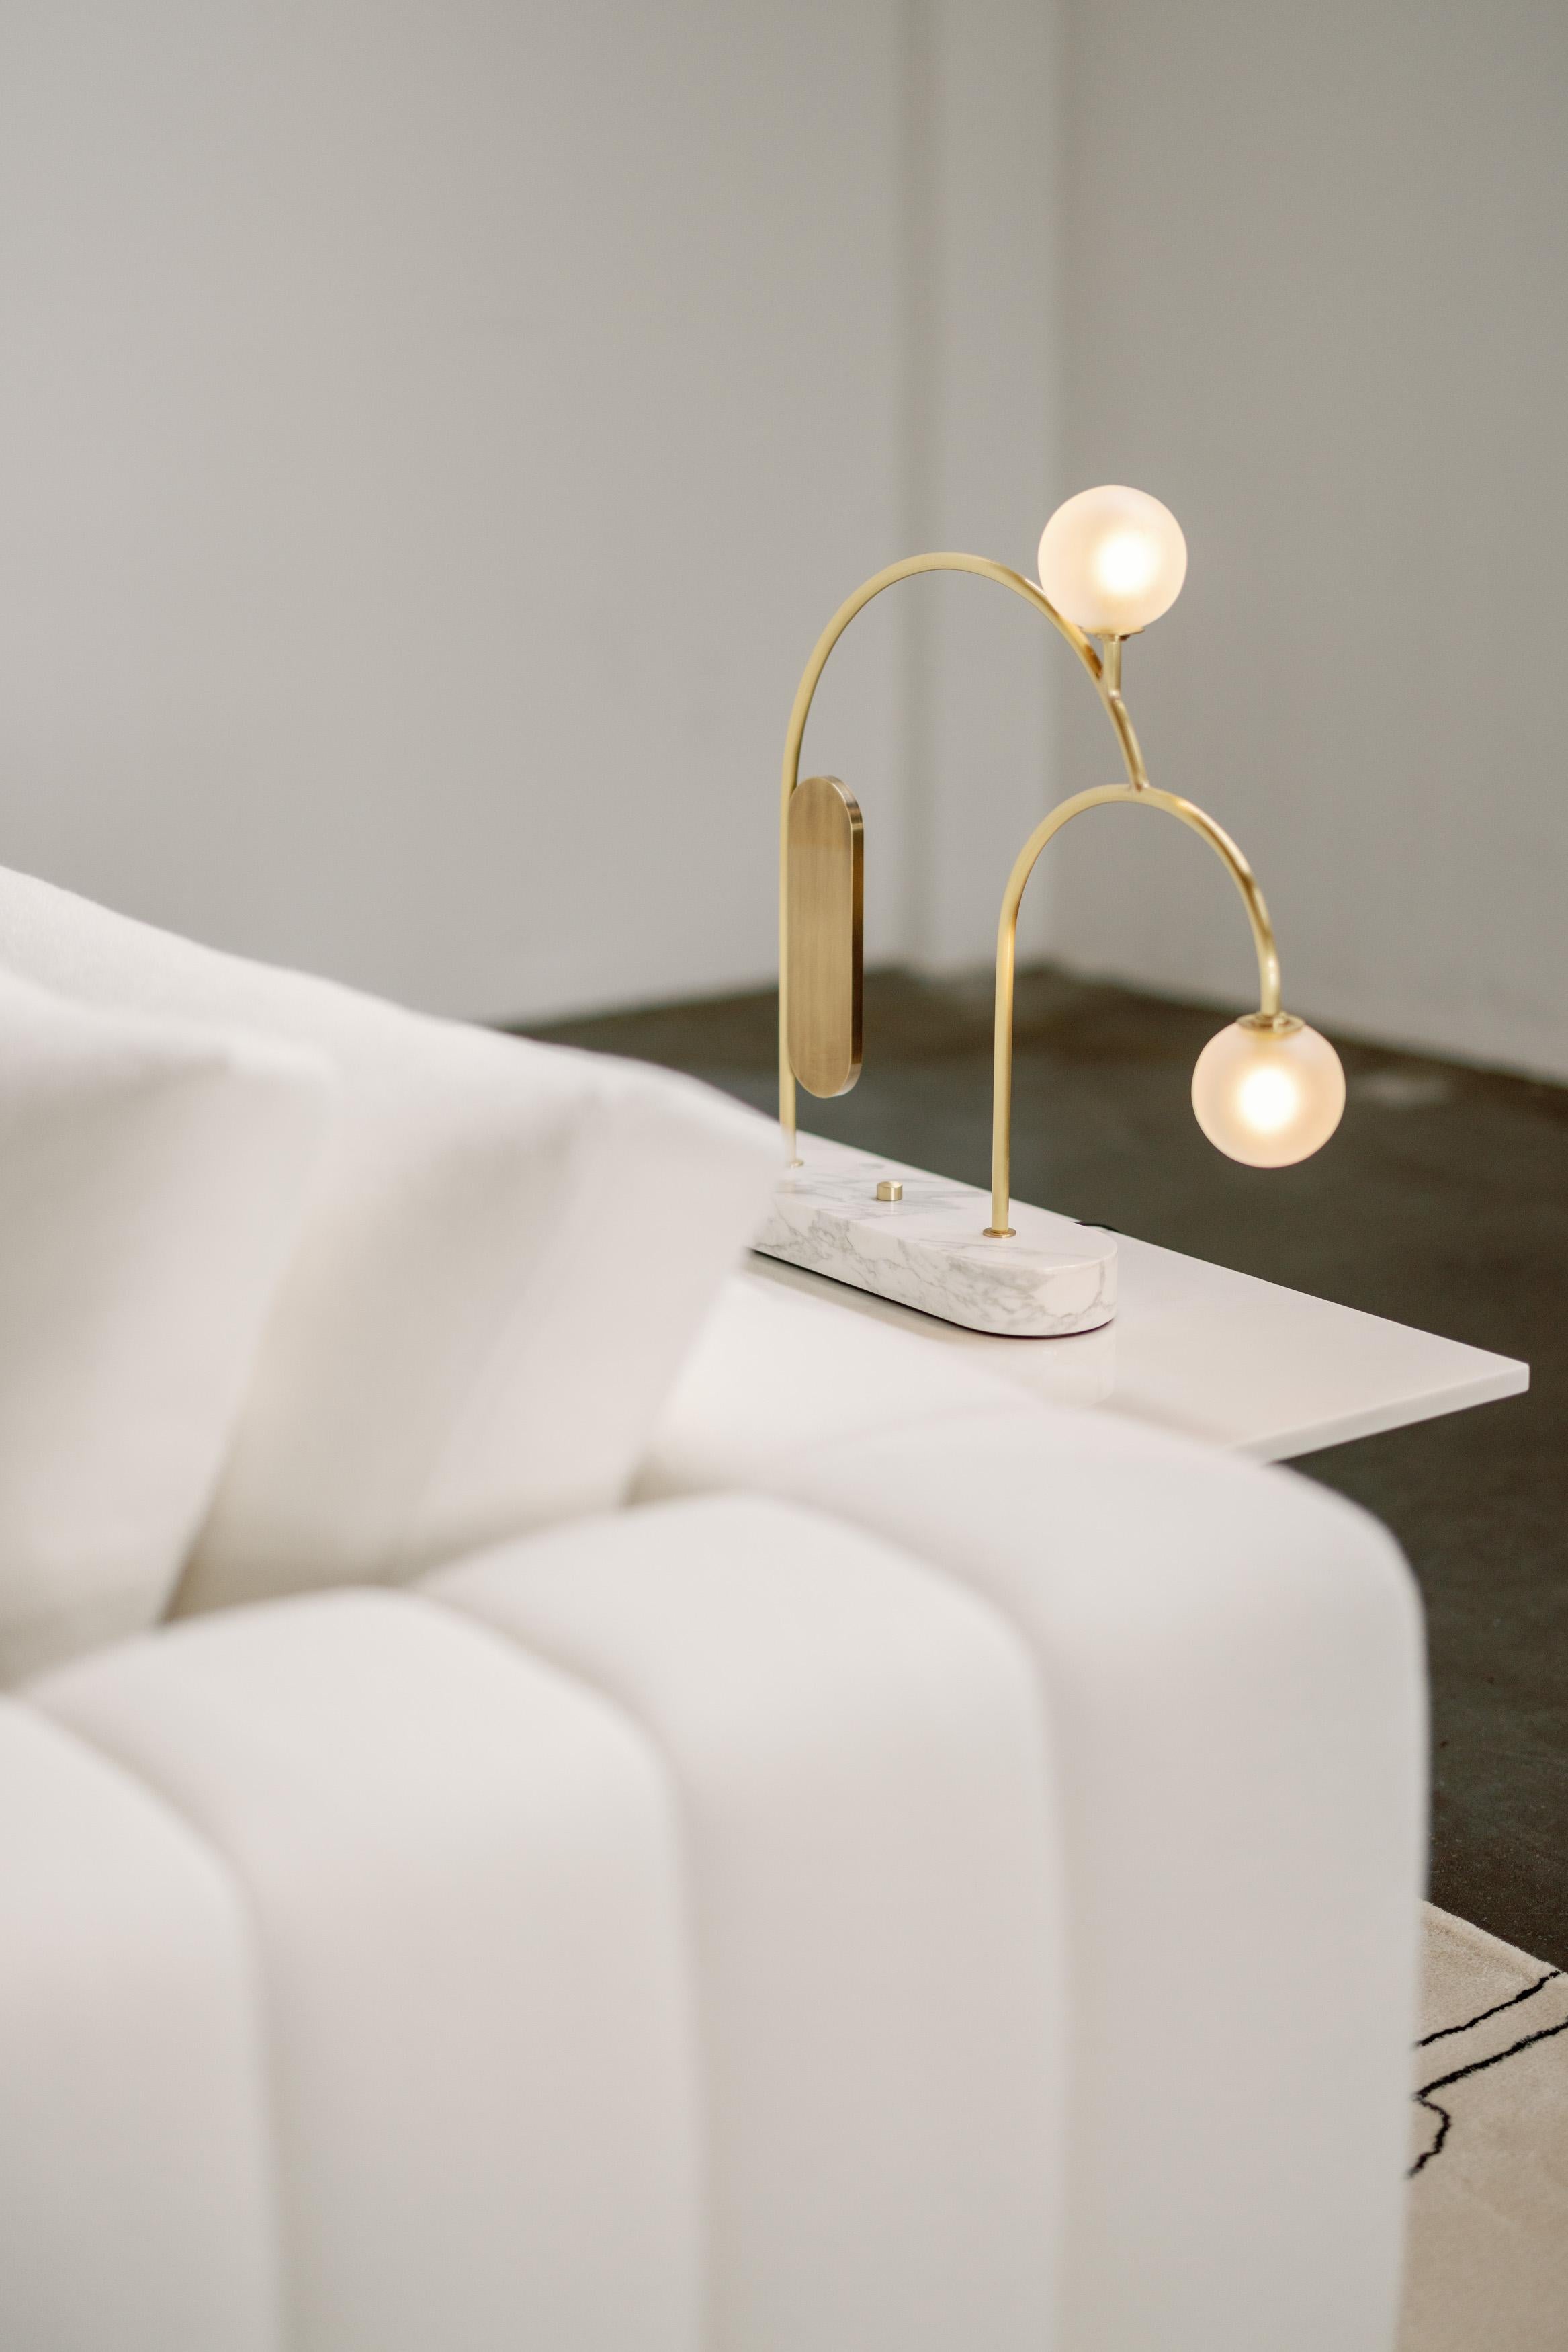 Two Cordless Table Lamp, Contemporary Collection, Handcrafted in Portugal - Europe by Greenapple.

The Two cordless table lamp redefines the concepts of functionality and style in contemporary interior design with unparalleled elegance. By combining